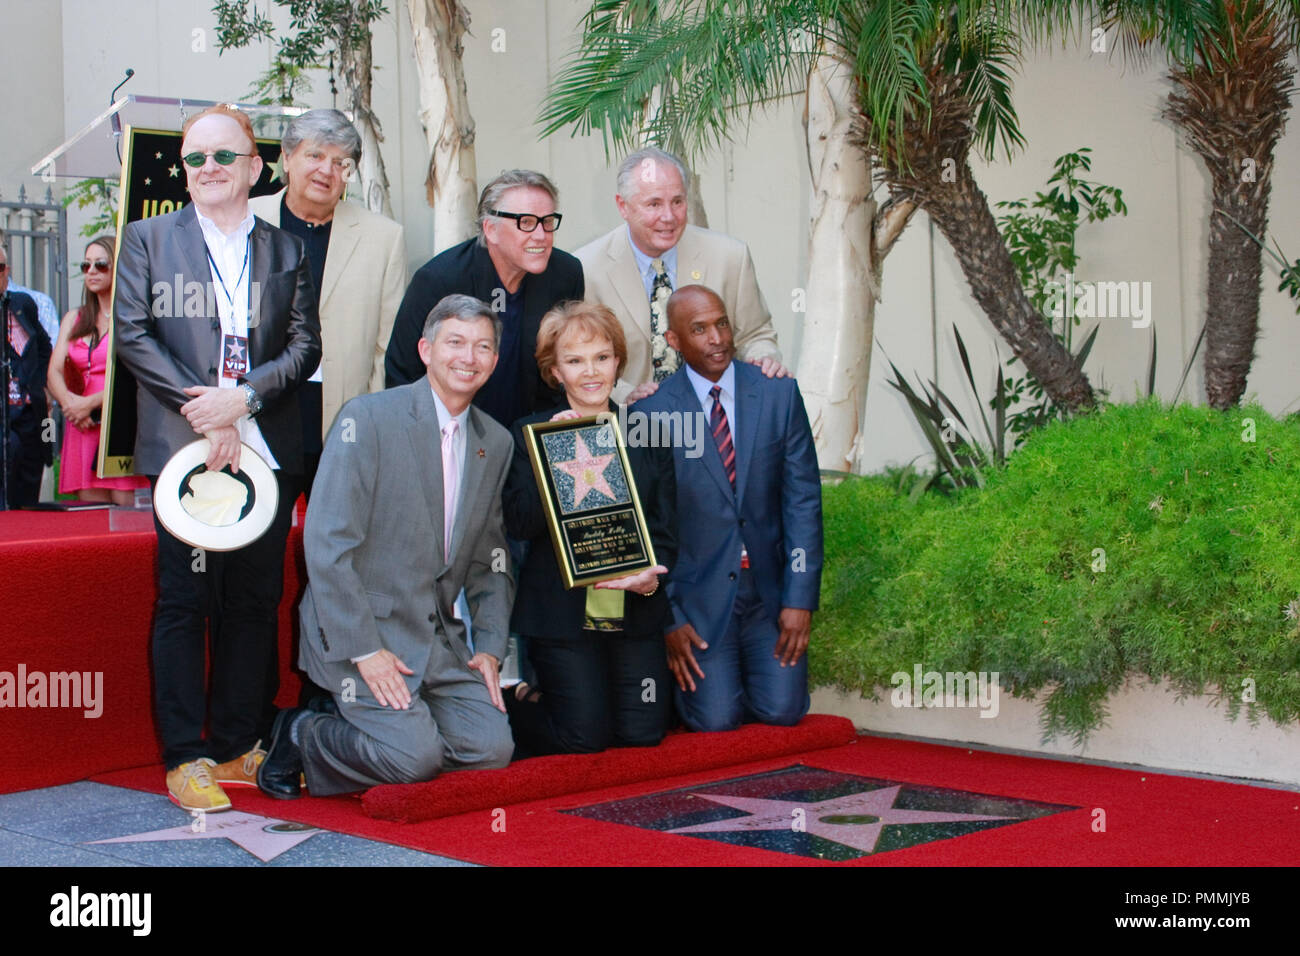 Maria Elena Holly at the Hollywood Chamber of Commerce ceremony to posthumously honor her late husband Buddy Holly with a star on the Hollywood Walk of Fame in Hollywood, CA, September 7, 2011. Photo by Joe Martinez / PictureLux Stock Photo